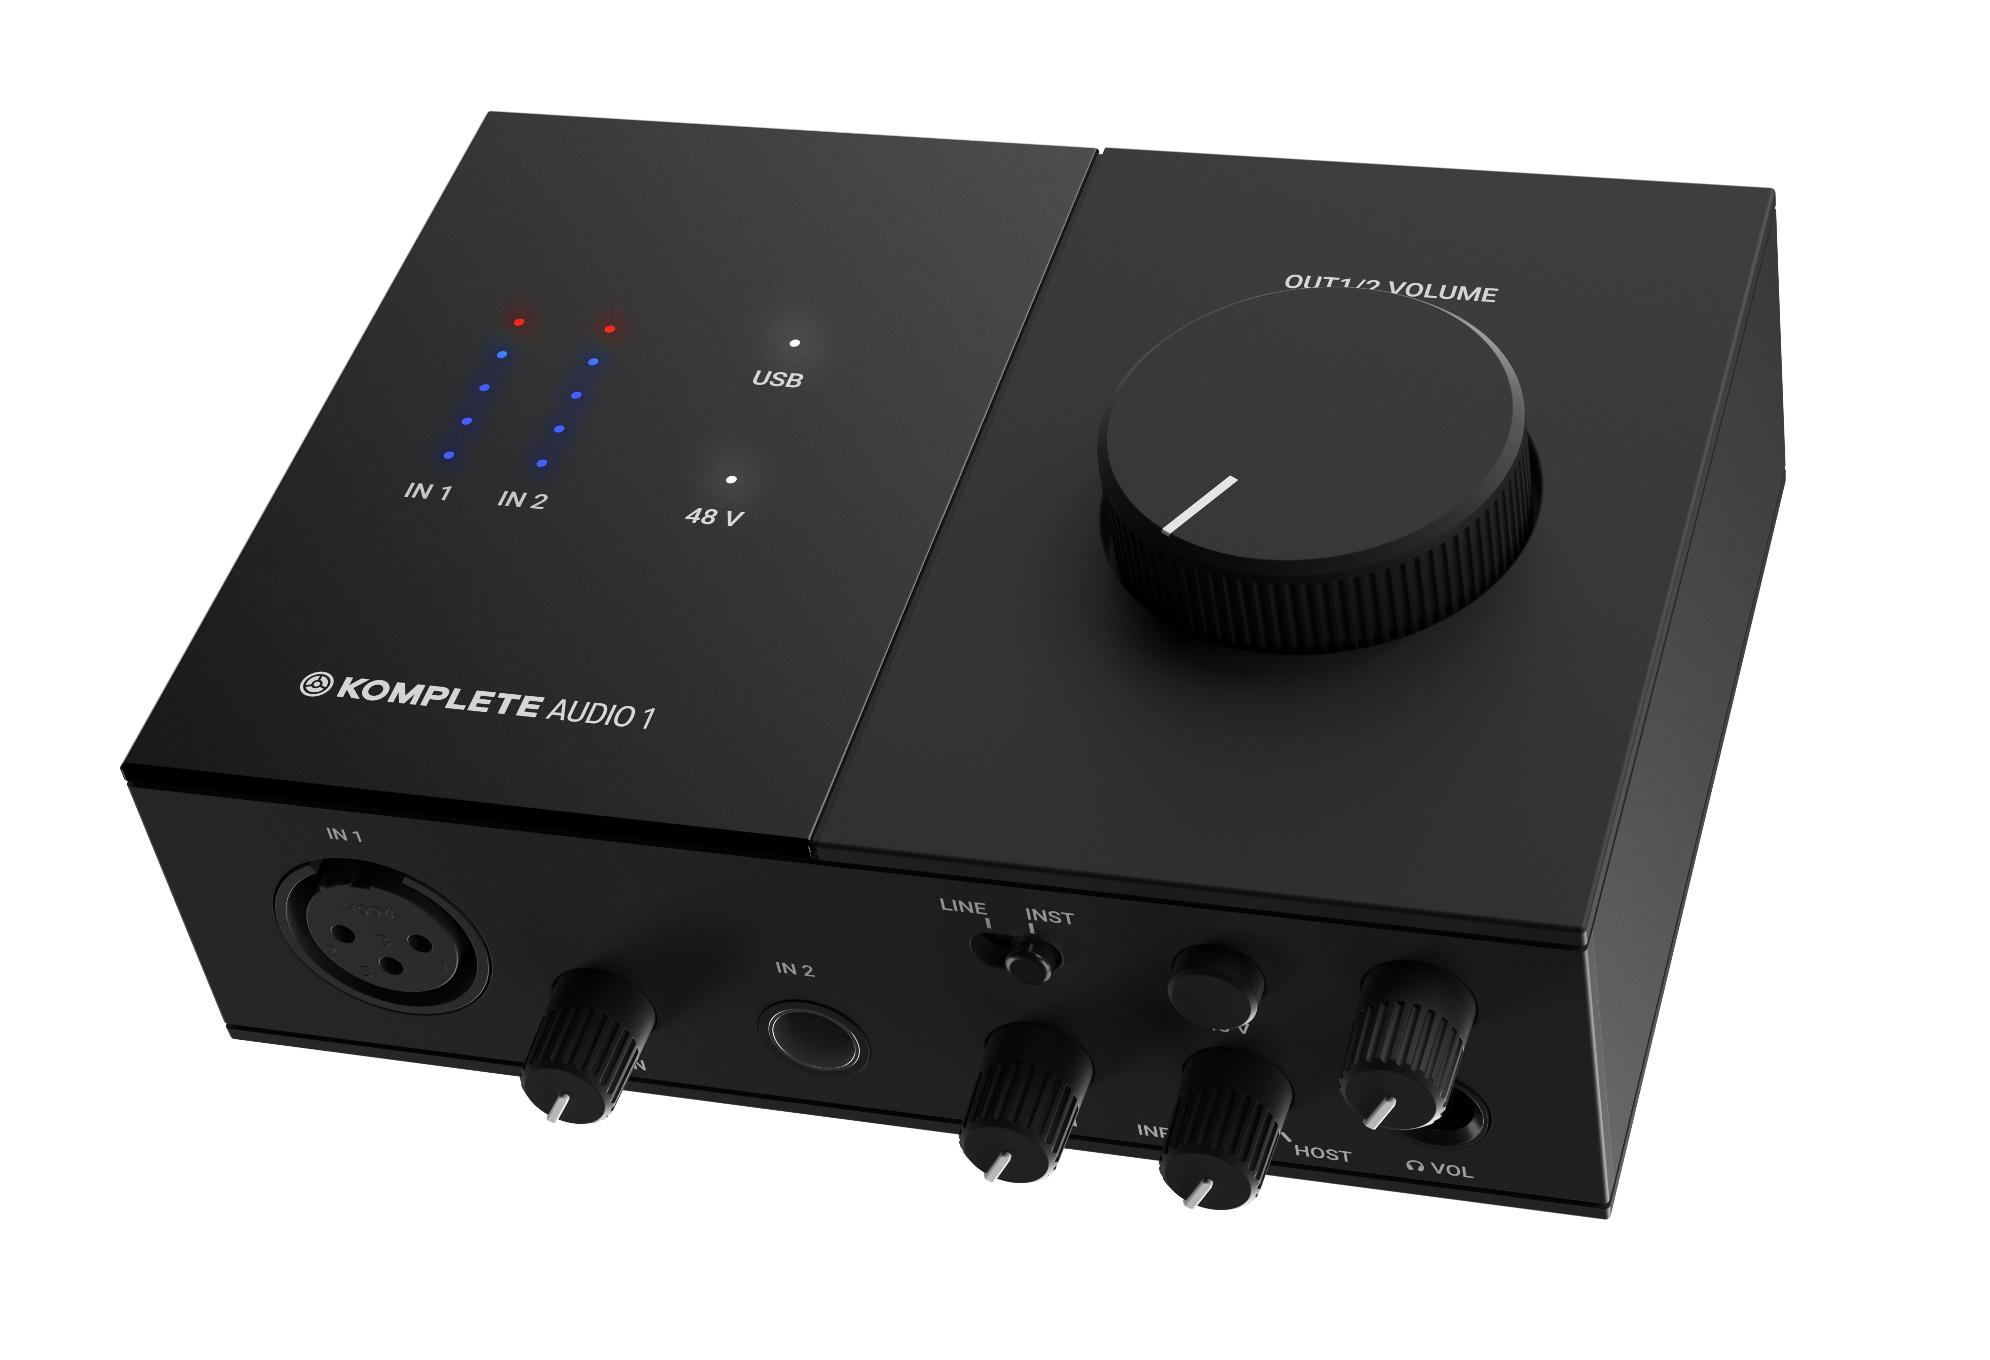 stereoanlæg væv Skære Native Instruments Komplete Audio 1 192 KHz 24 Bit USB Recording Interface  With 1 XLR Input 1 Line Input And 2 RCA Outputs | Full Compass Systems